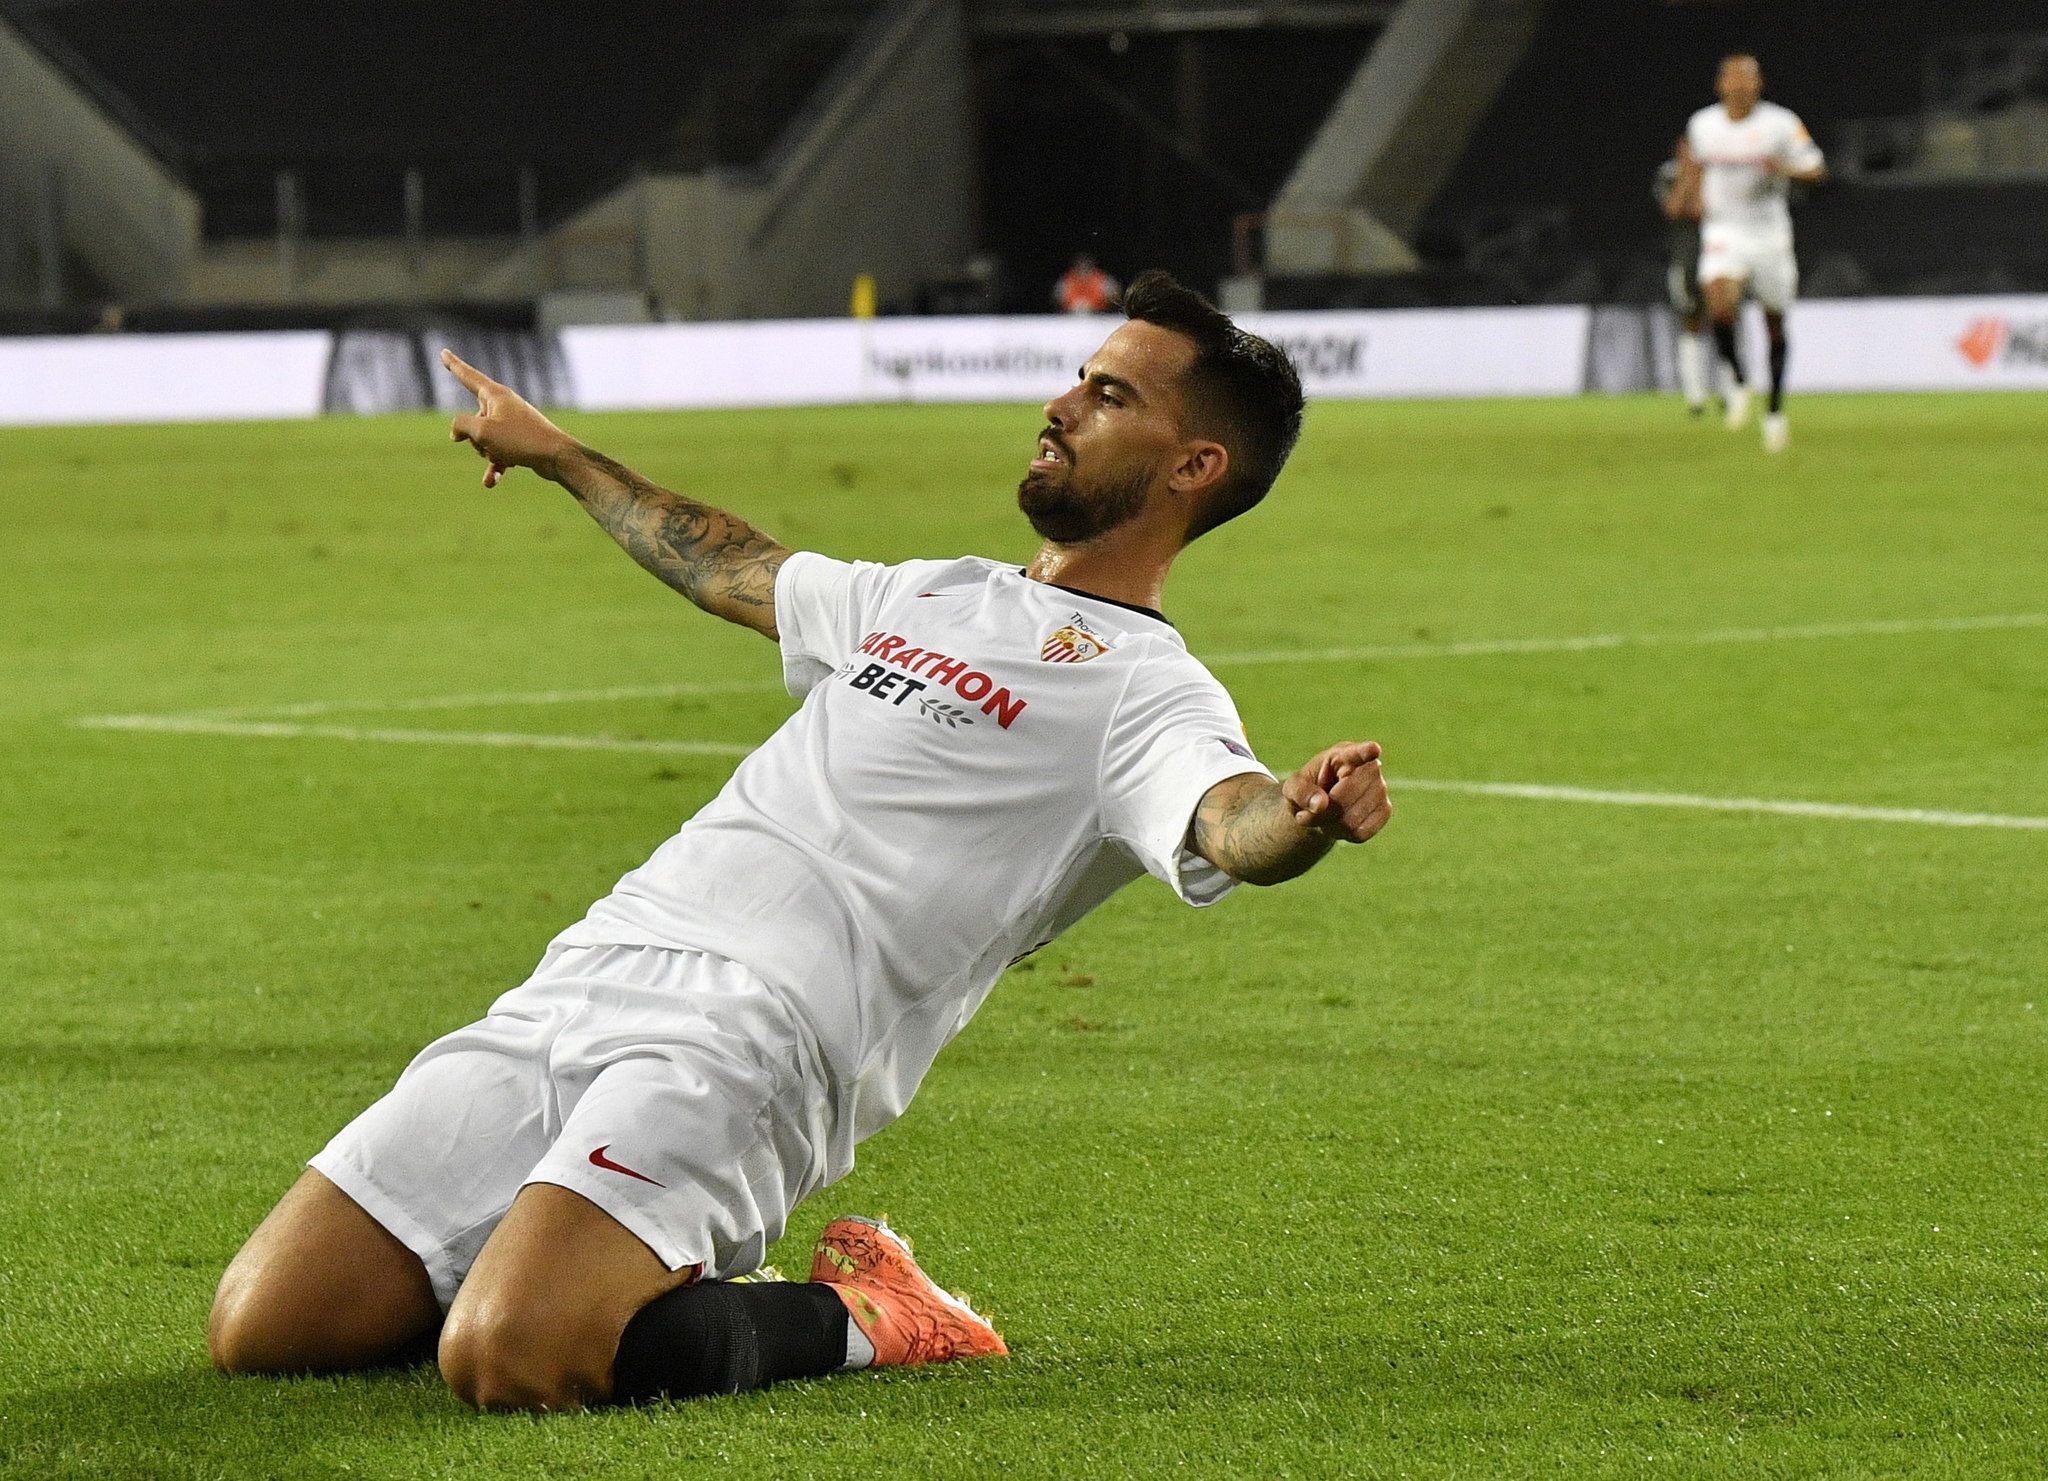 Cologne (Germany), 16/08/2020.- Suso of lt;HIT gt;Sevilla lt;/HIT gt; celebrates scoring the equalizer during the UEFA Europa League semi final match between lt;HIT gt;Sevilla lt;/HIT gt; FC and Manchester United in Cologne, Germany, 16 August 2020. (Alemania, Colonia) EFE/EPA/Martin Meissner / POOL